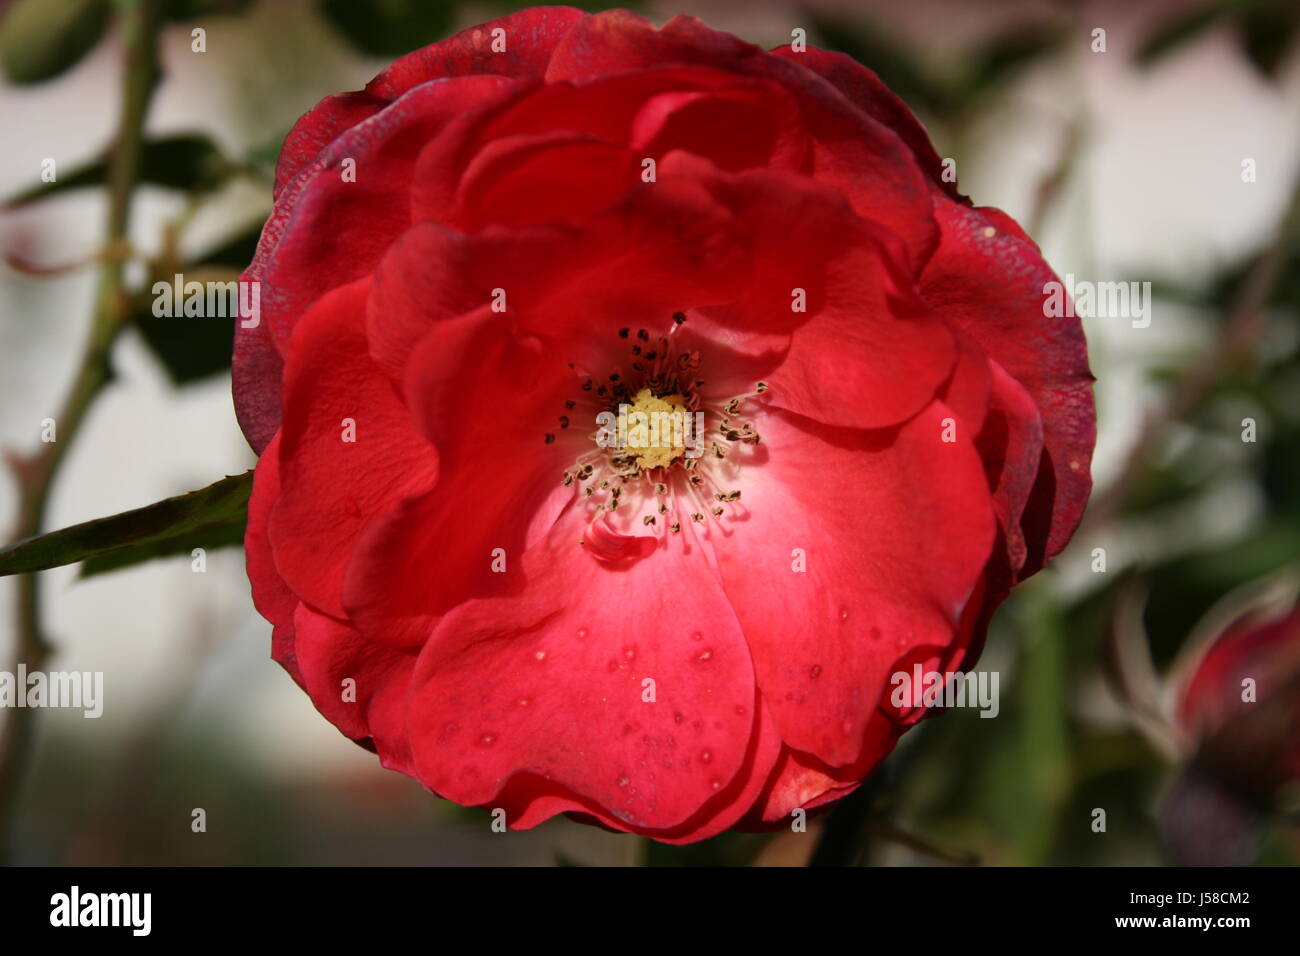 flower rose plant seduction roseate artful bewitch innere werte offenes Stock Photo